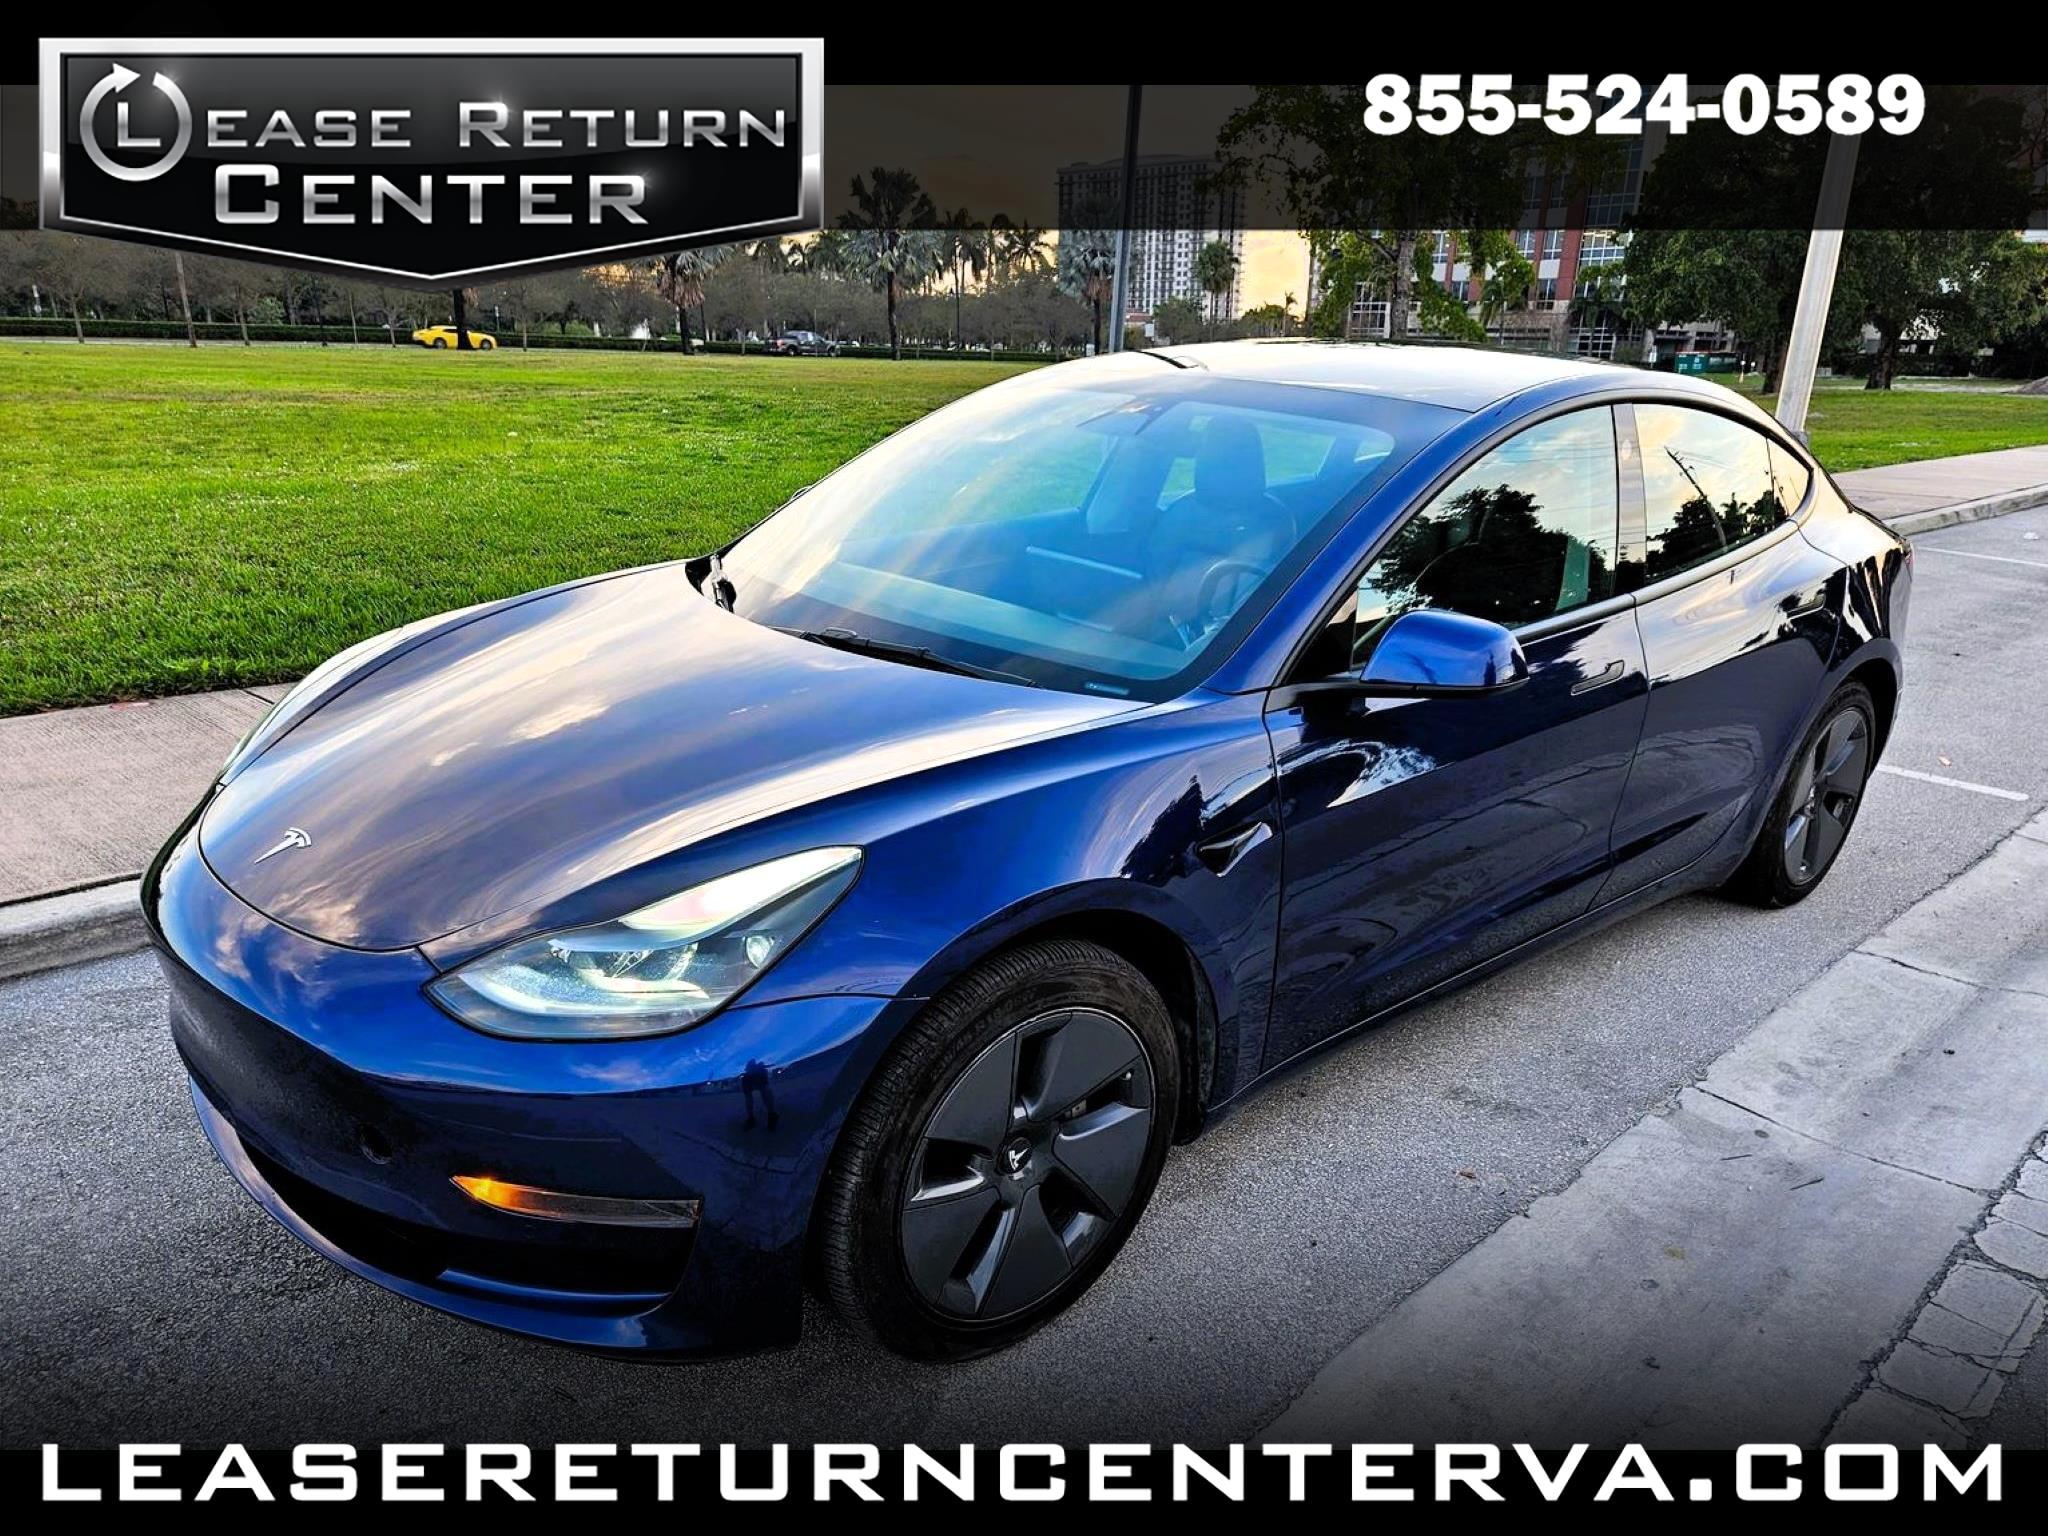 Used Cars for Sale Northern Virginia VA 22026 Lease Return Center